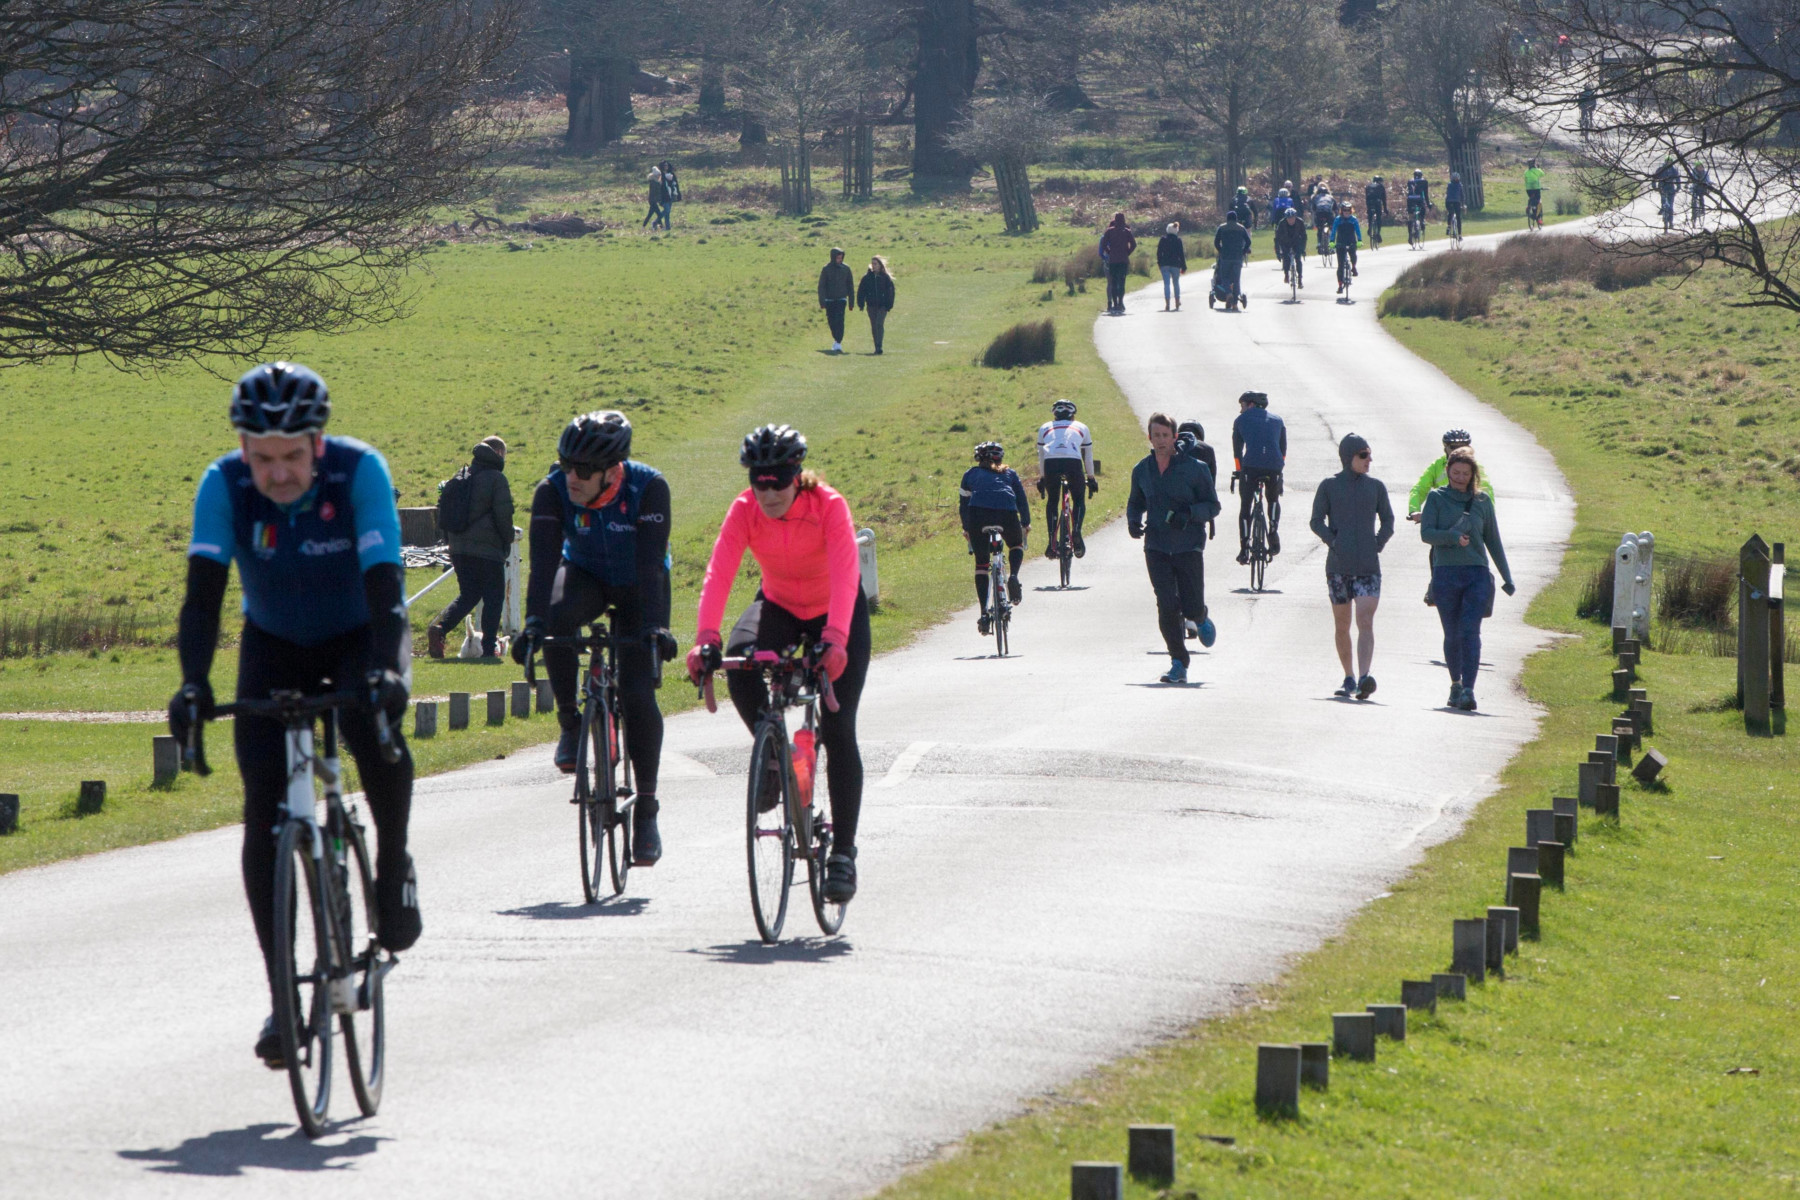  Richmond Park was full of cyclists and runners on Sunday despite pleas to keep socially distanced were ignored